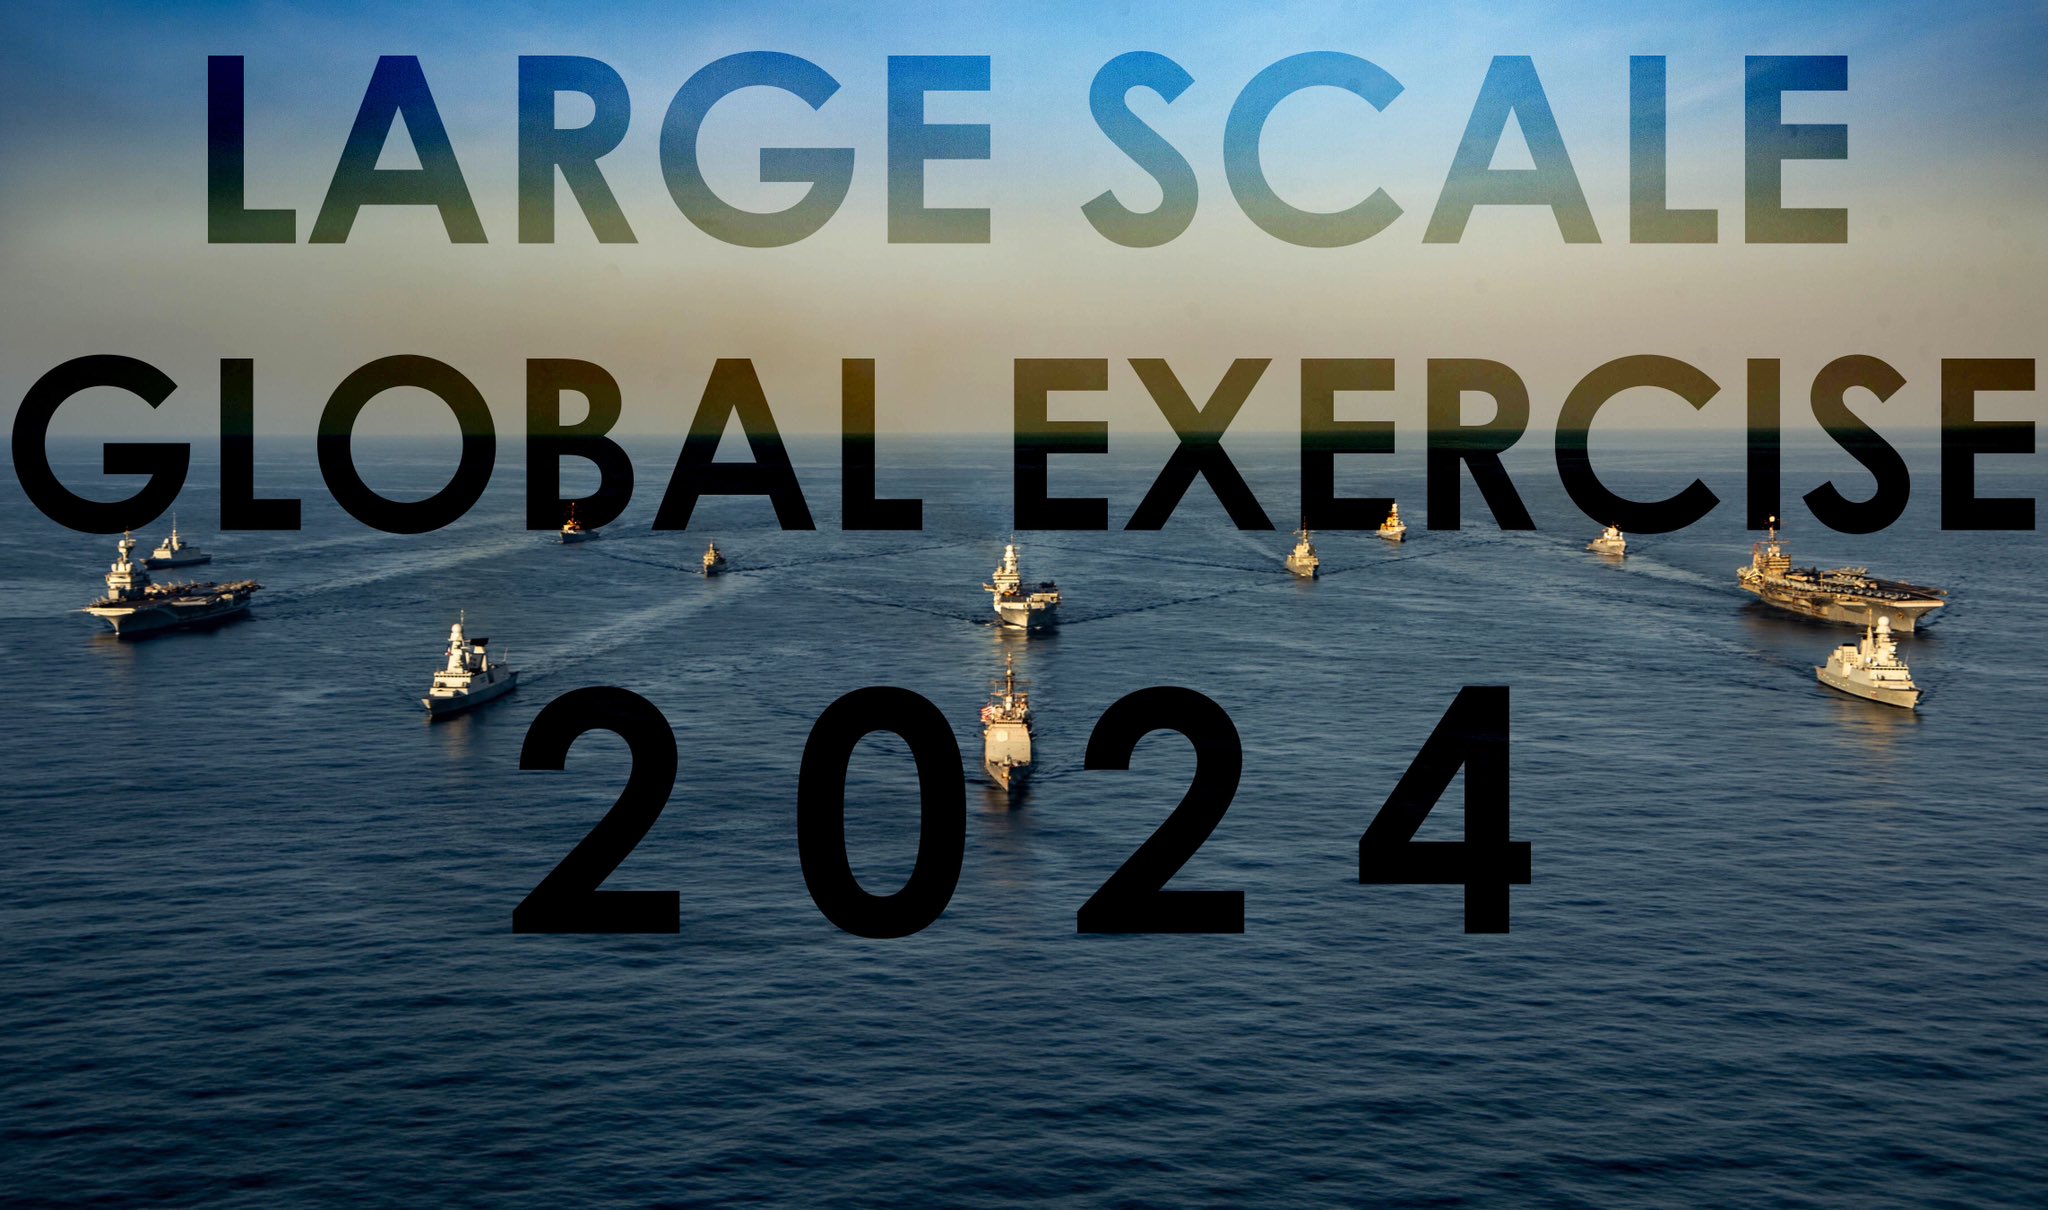 Large Scale Global Exercise 2024 to Start this Month - Naval News